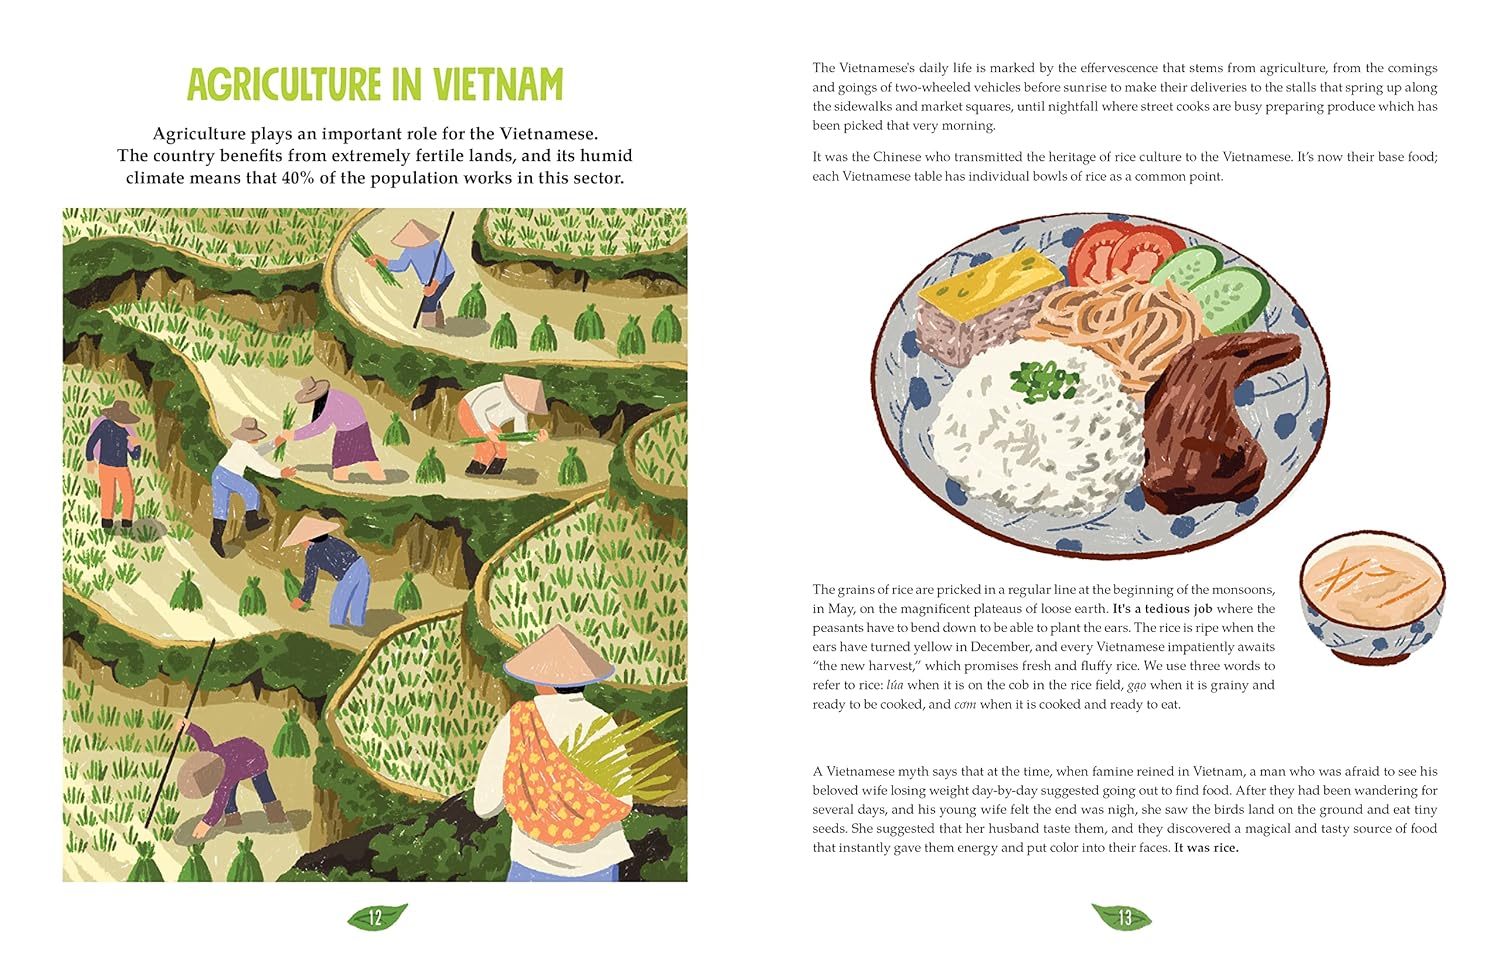 Vietnamese Cuisine: Recipes and Anecdotes from Vietnamese Gastronomic Culture (Nathalie Nguyen, Mélody Ung)